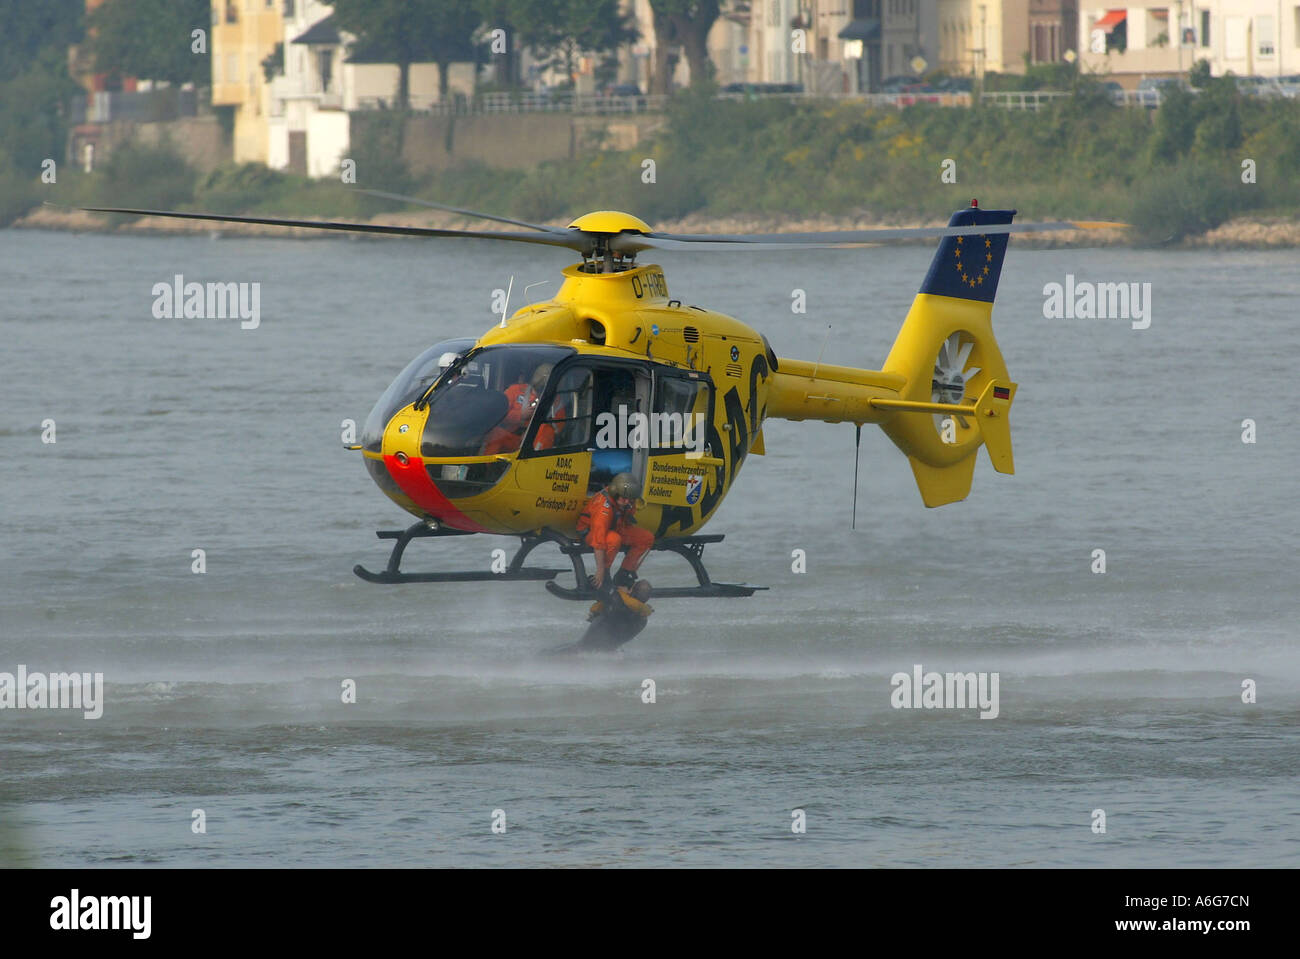 A rescue helicopter of the ADAC is training to rescue people out of the river rhine near Koblenz, Rhineland-Palatinate, Germany Stock Photo